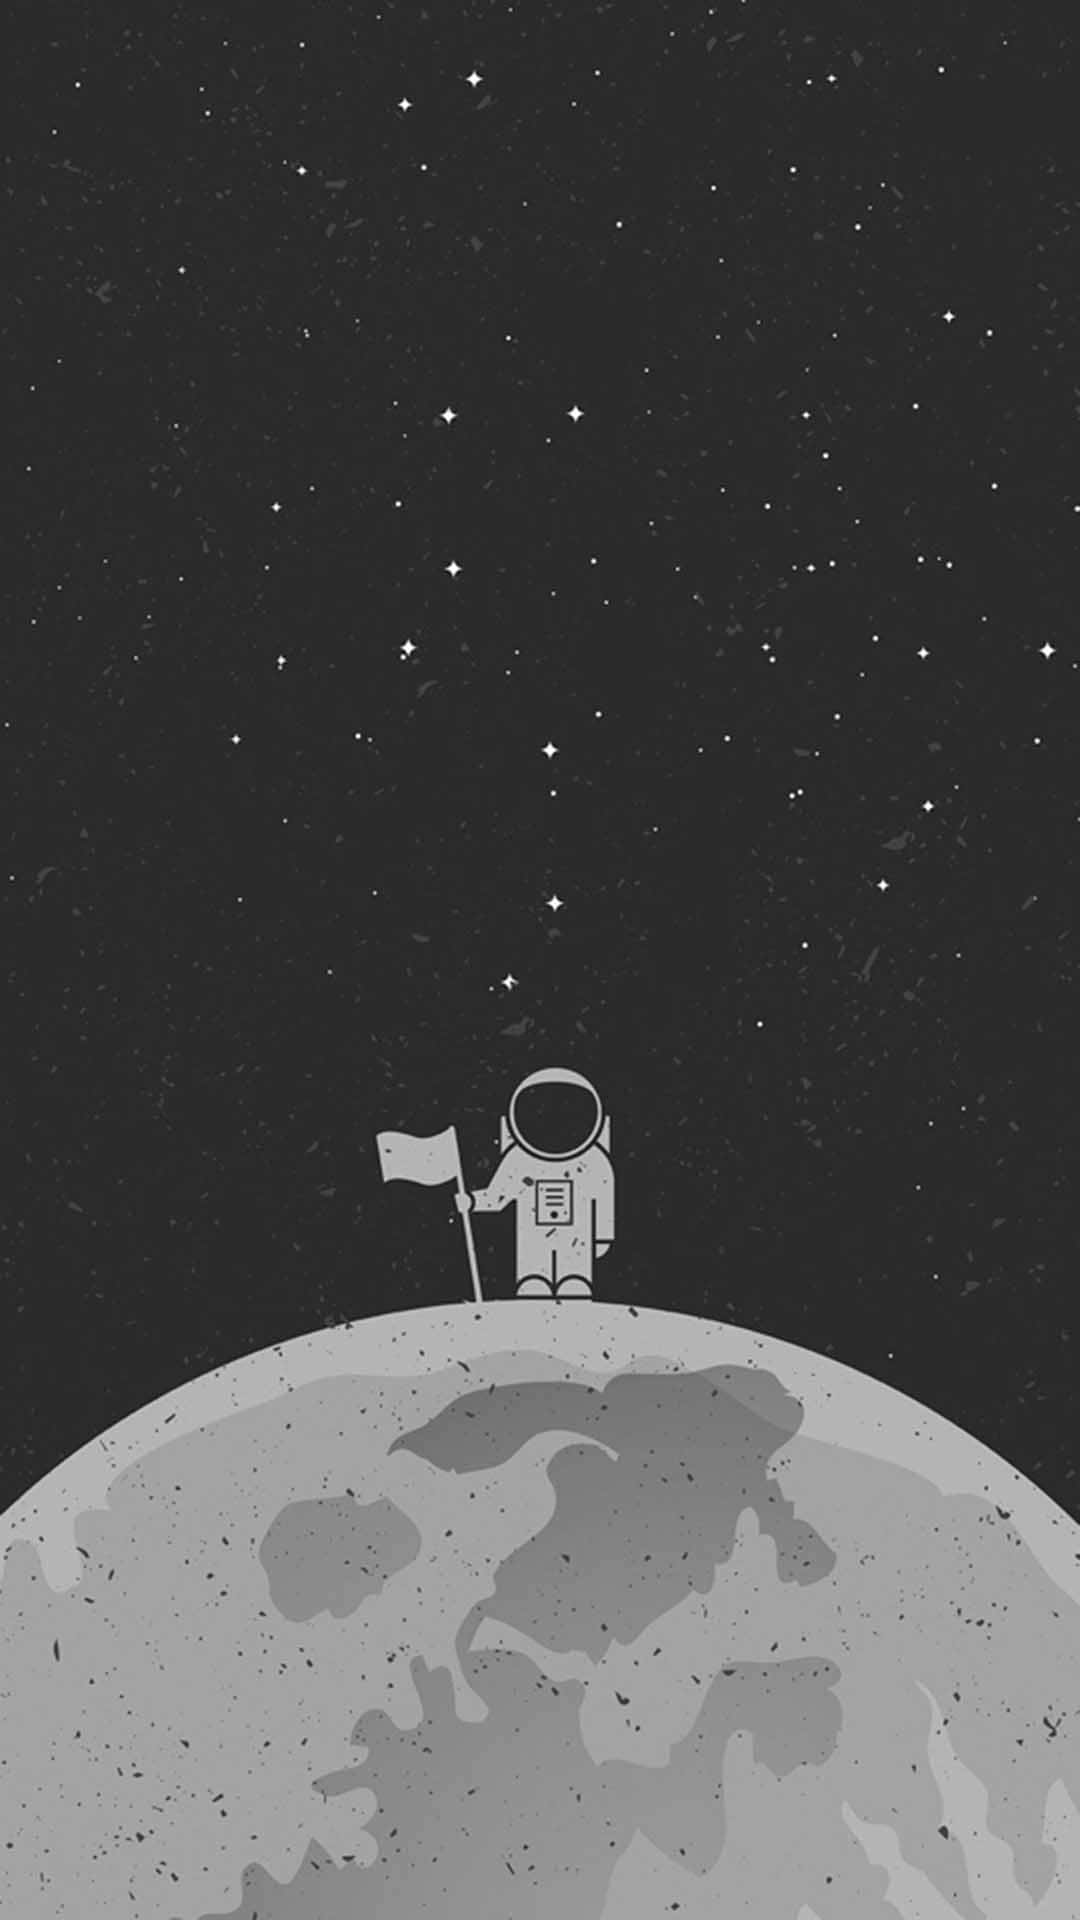 Free Animated Space Wallpaper Downloads, [100+] Animated Space Wallpapers  for FREE 